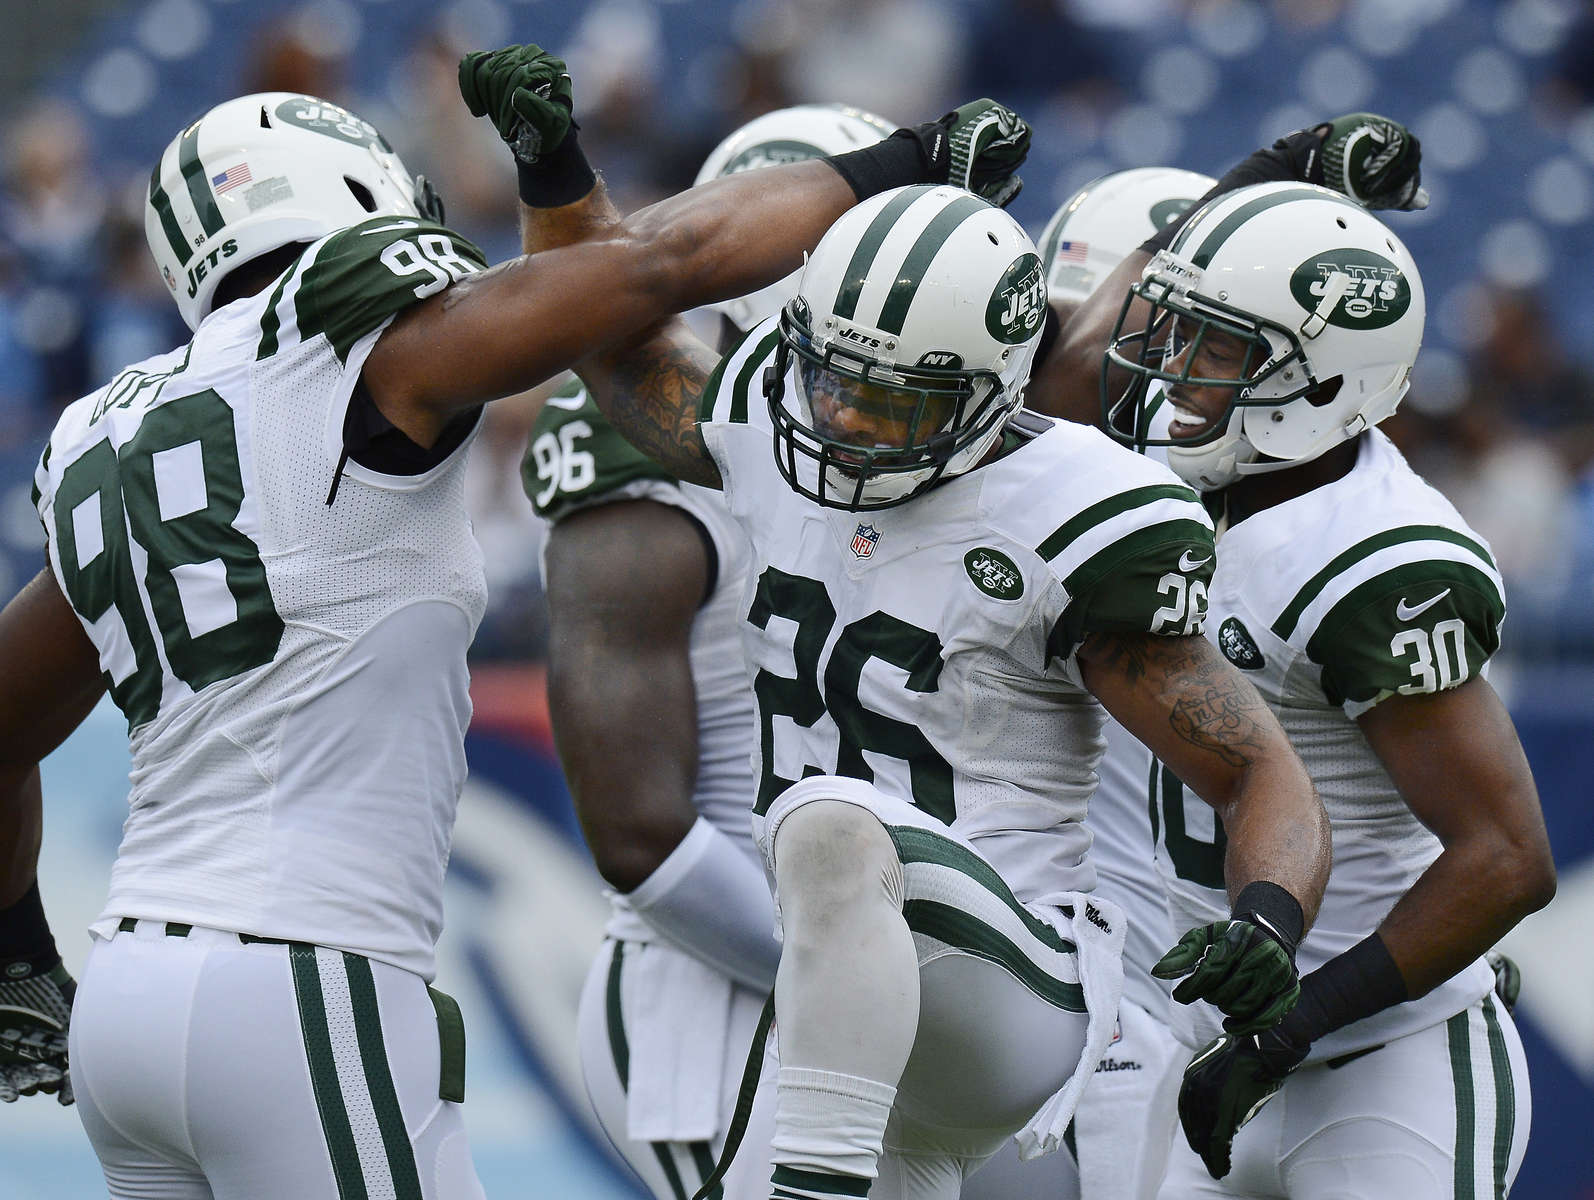 New York Jets players Quinton Coples, Dawan Landry and Darrin Walls get ready for an NFL football gameagainst the Tennessee Titans on Sept. 29, 2013, in Nashville, Tenn. (AP Photo/ Mark Zaleski)